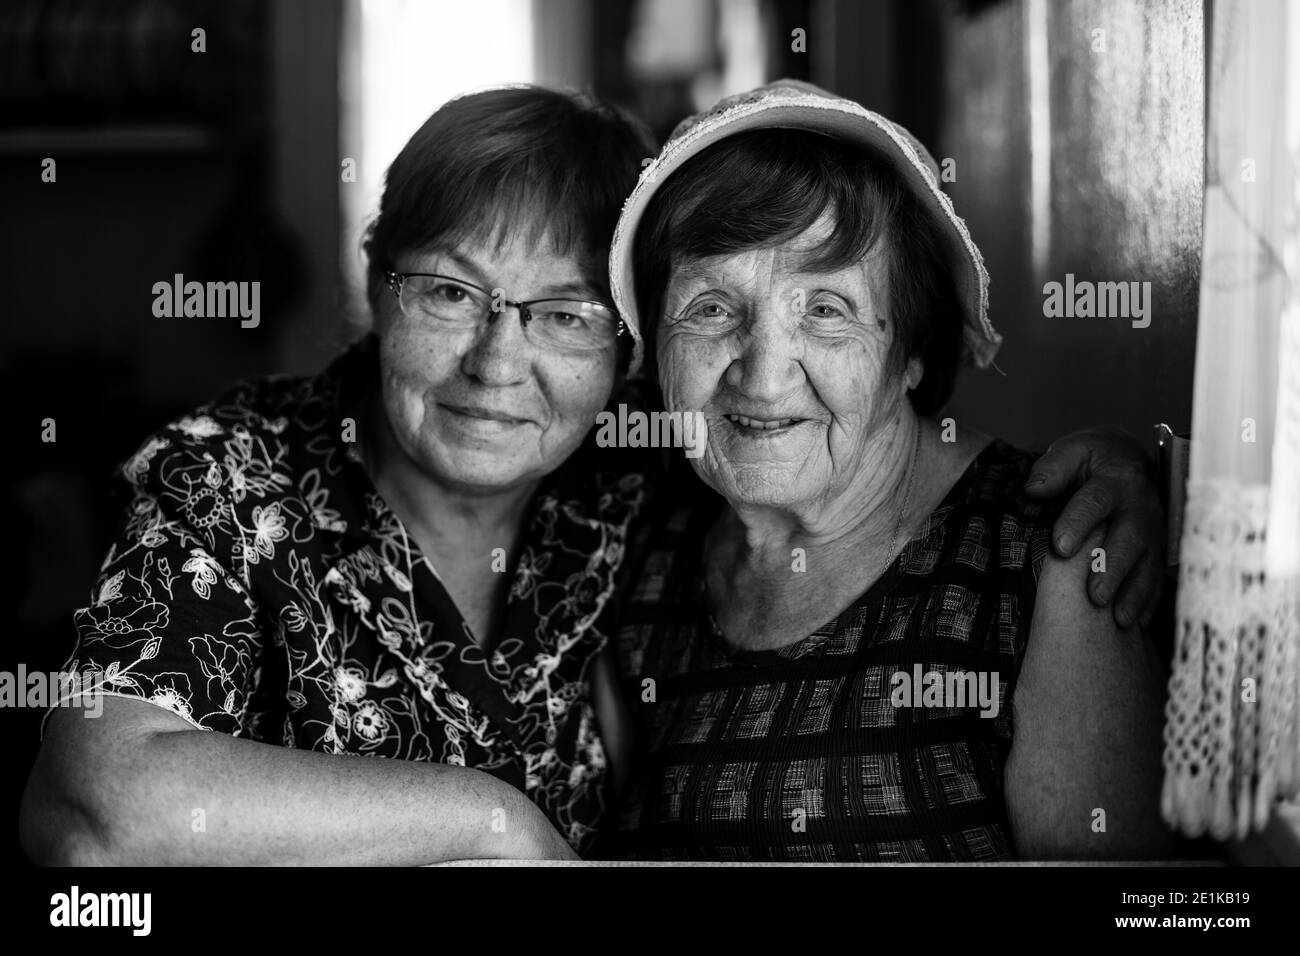 Mature mom Black and White Stock Photos & Images - Alamy